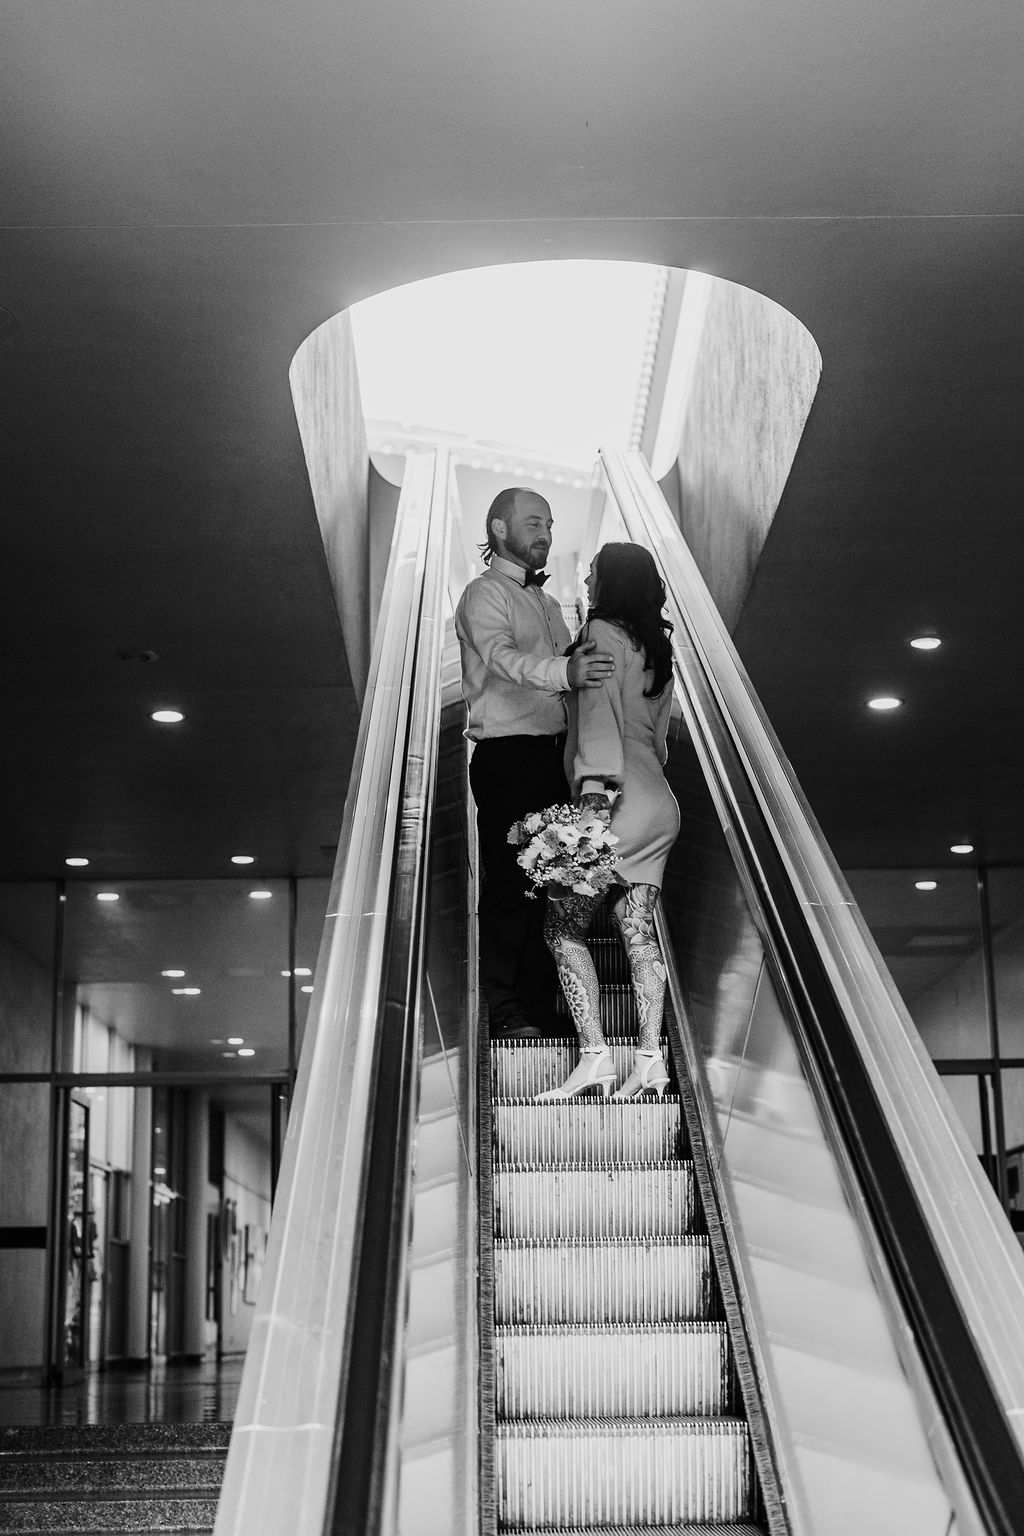 Bay Area wedding photographer captures black and white portrait of bride and groom going up escalator in Marin County Civic Center